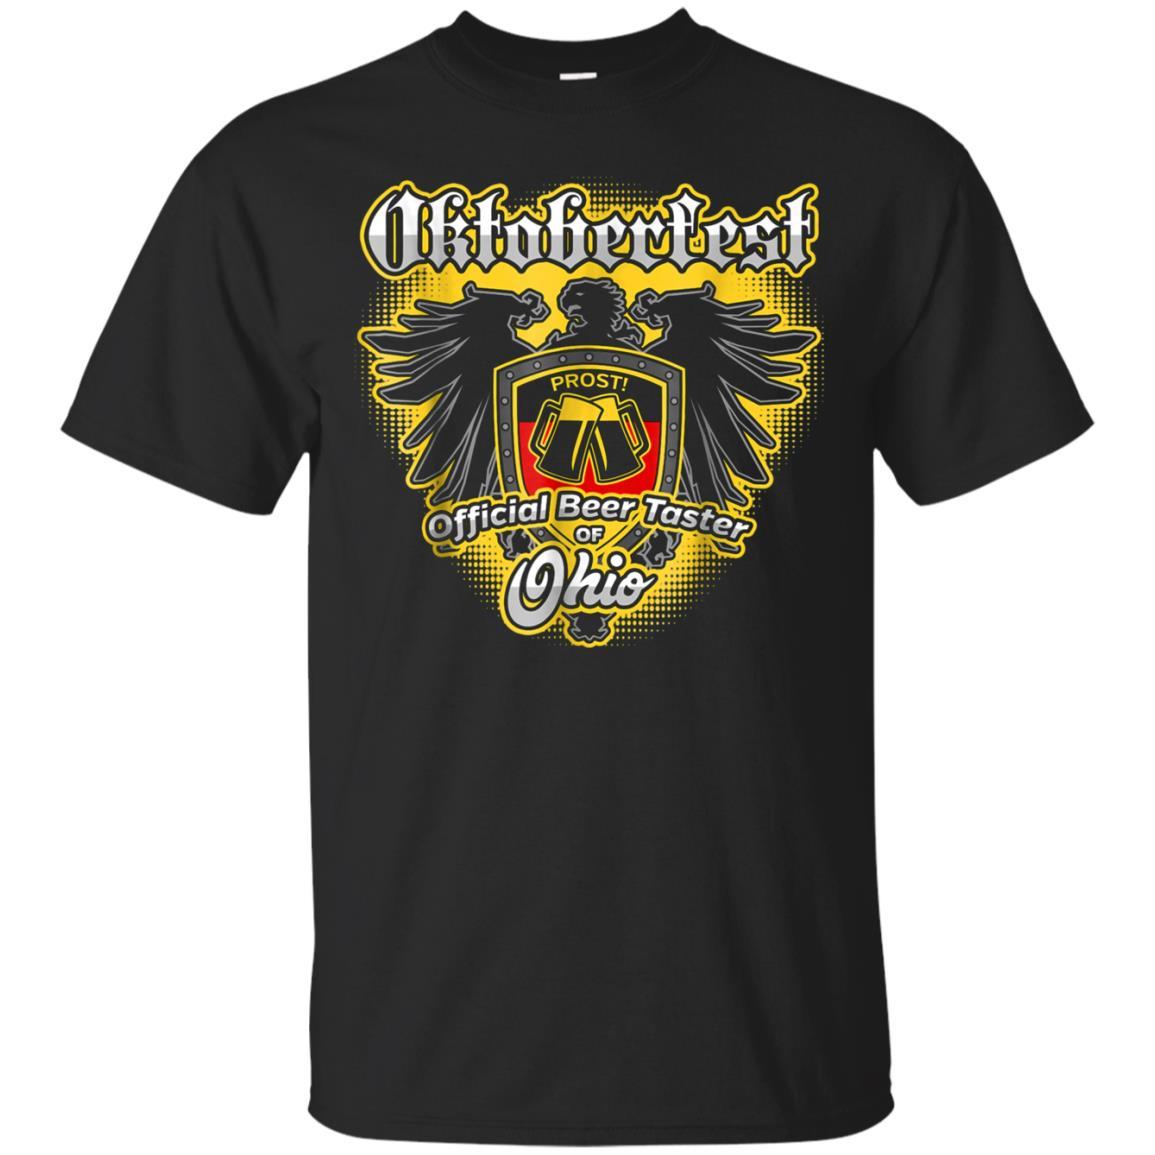 Check Out This Awesome Oktoberfest Ohio Beer Taster T Shirt